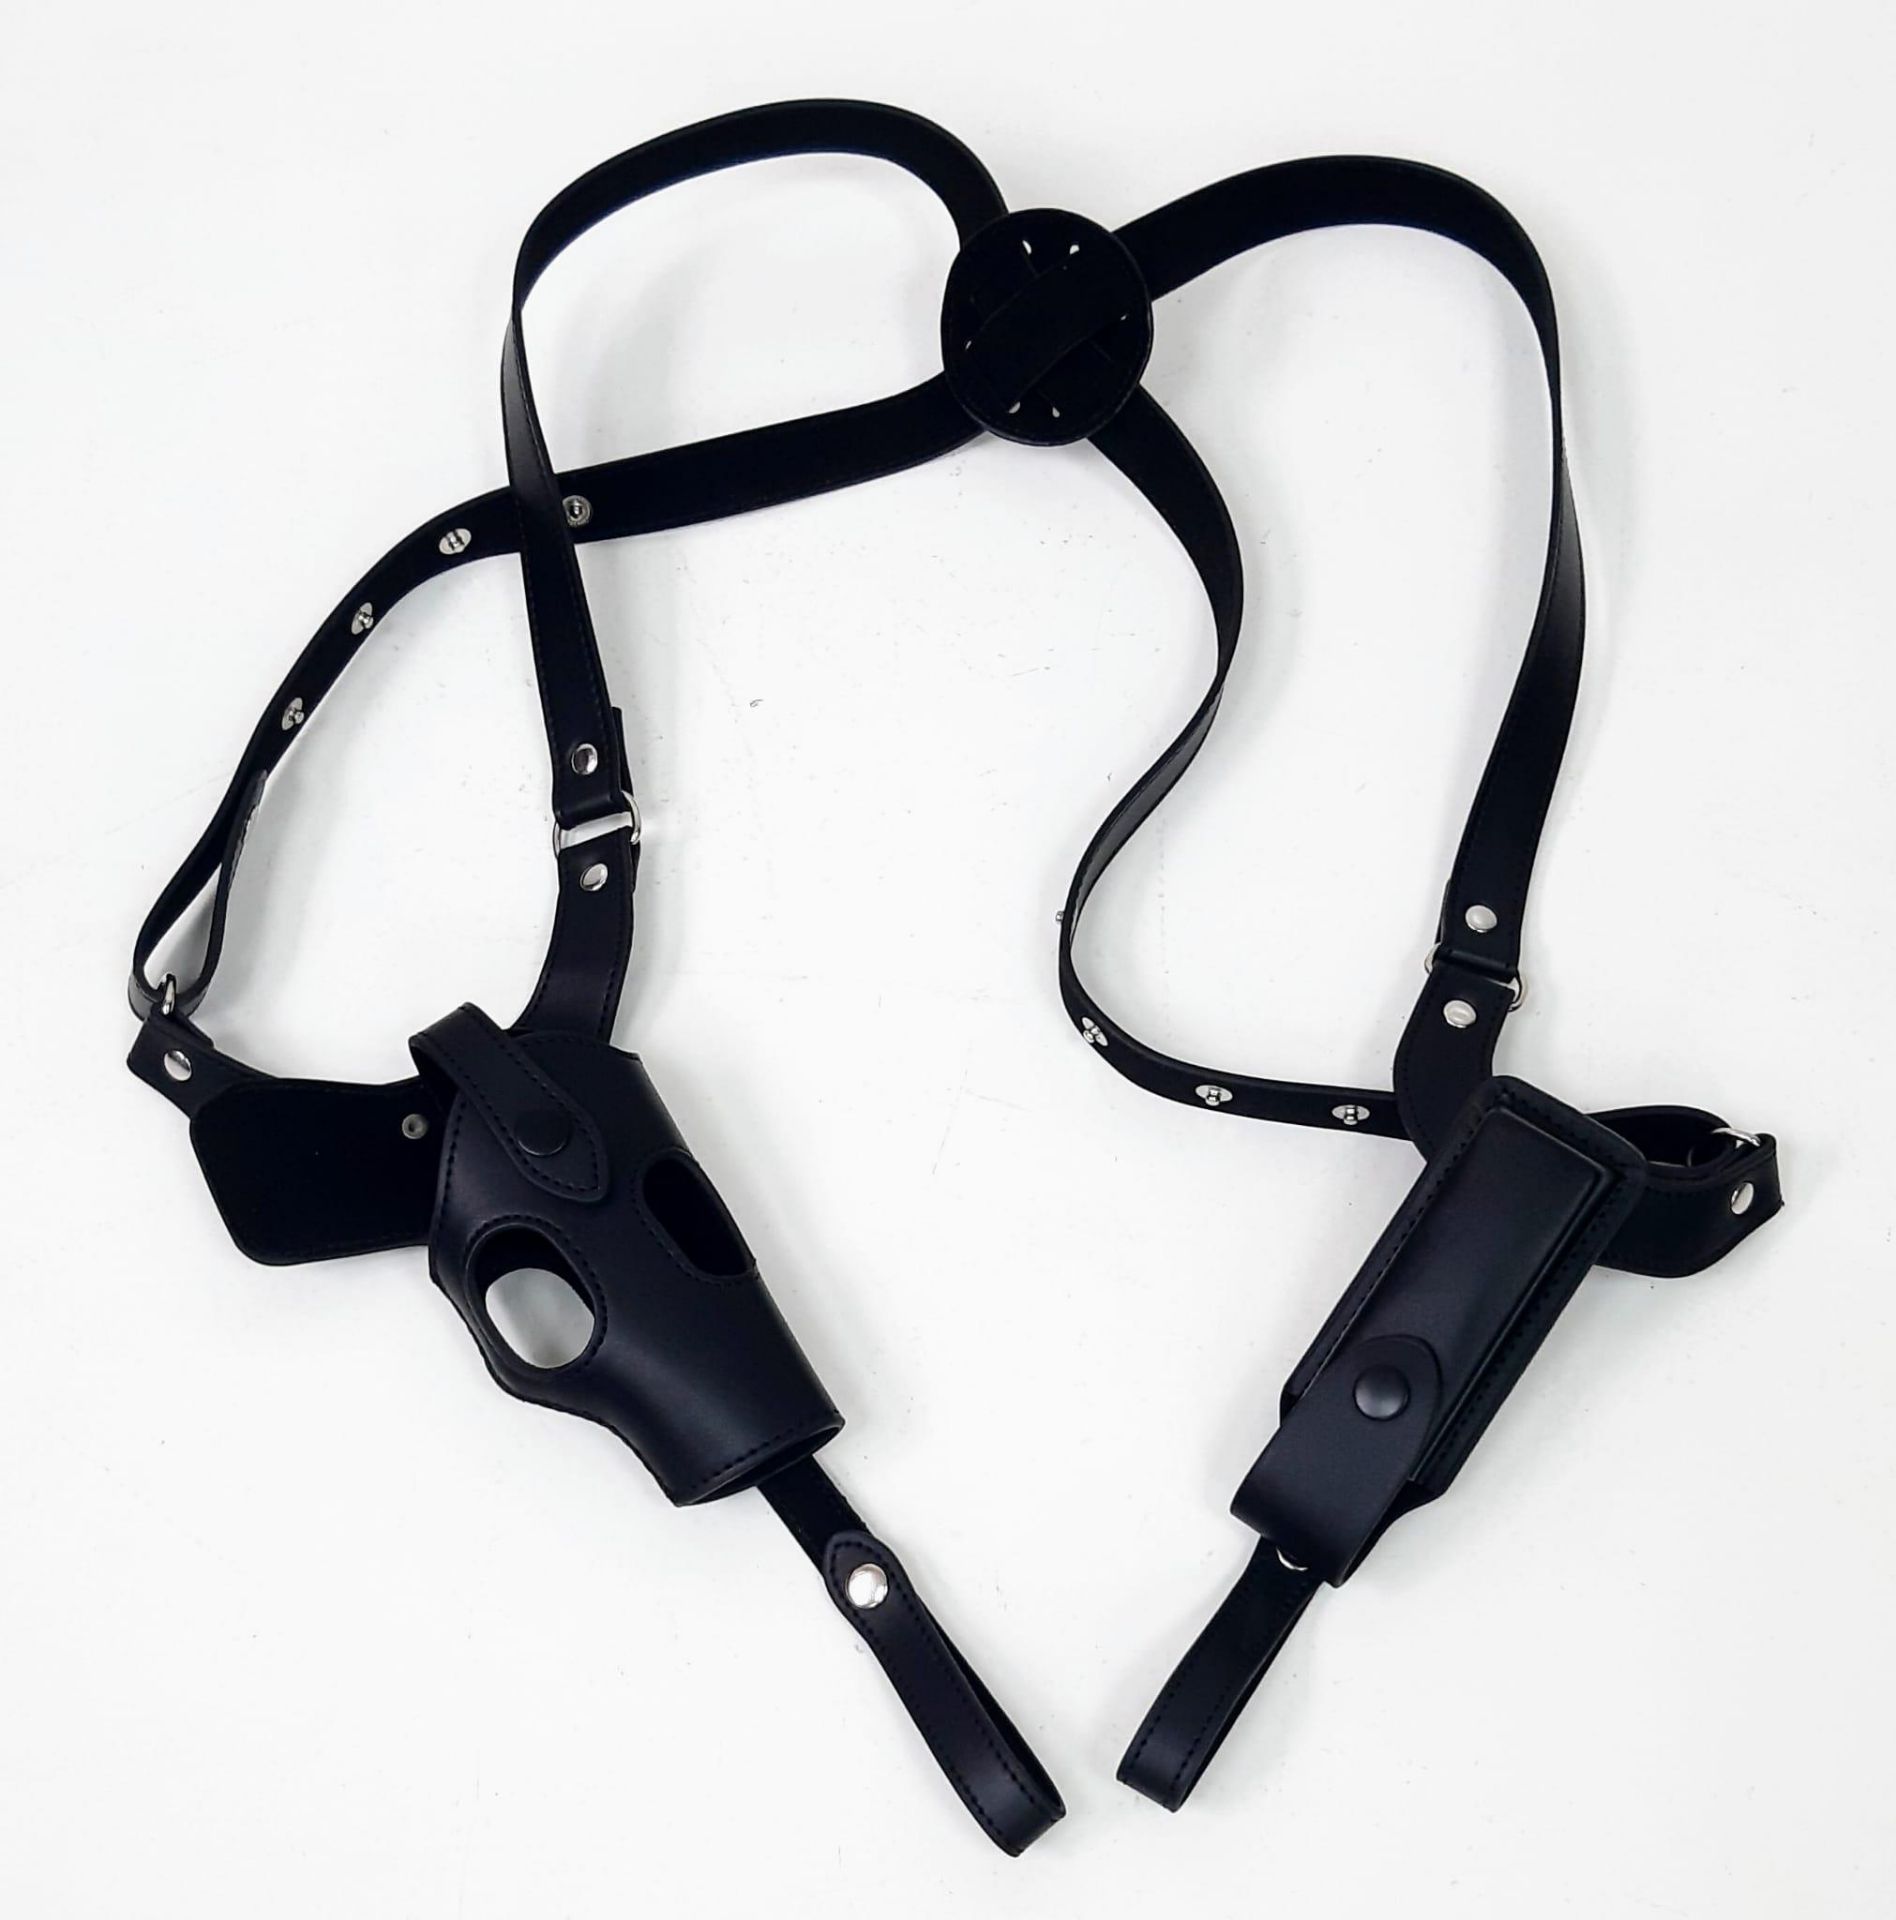 A C.I.A. STYLE BLACK LEATHER SHOULDER HOLSTER , FULLY ADJUSTABLE AND WITH REMOVABLE BELT LOOP